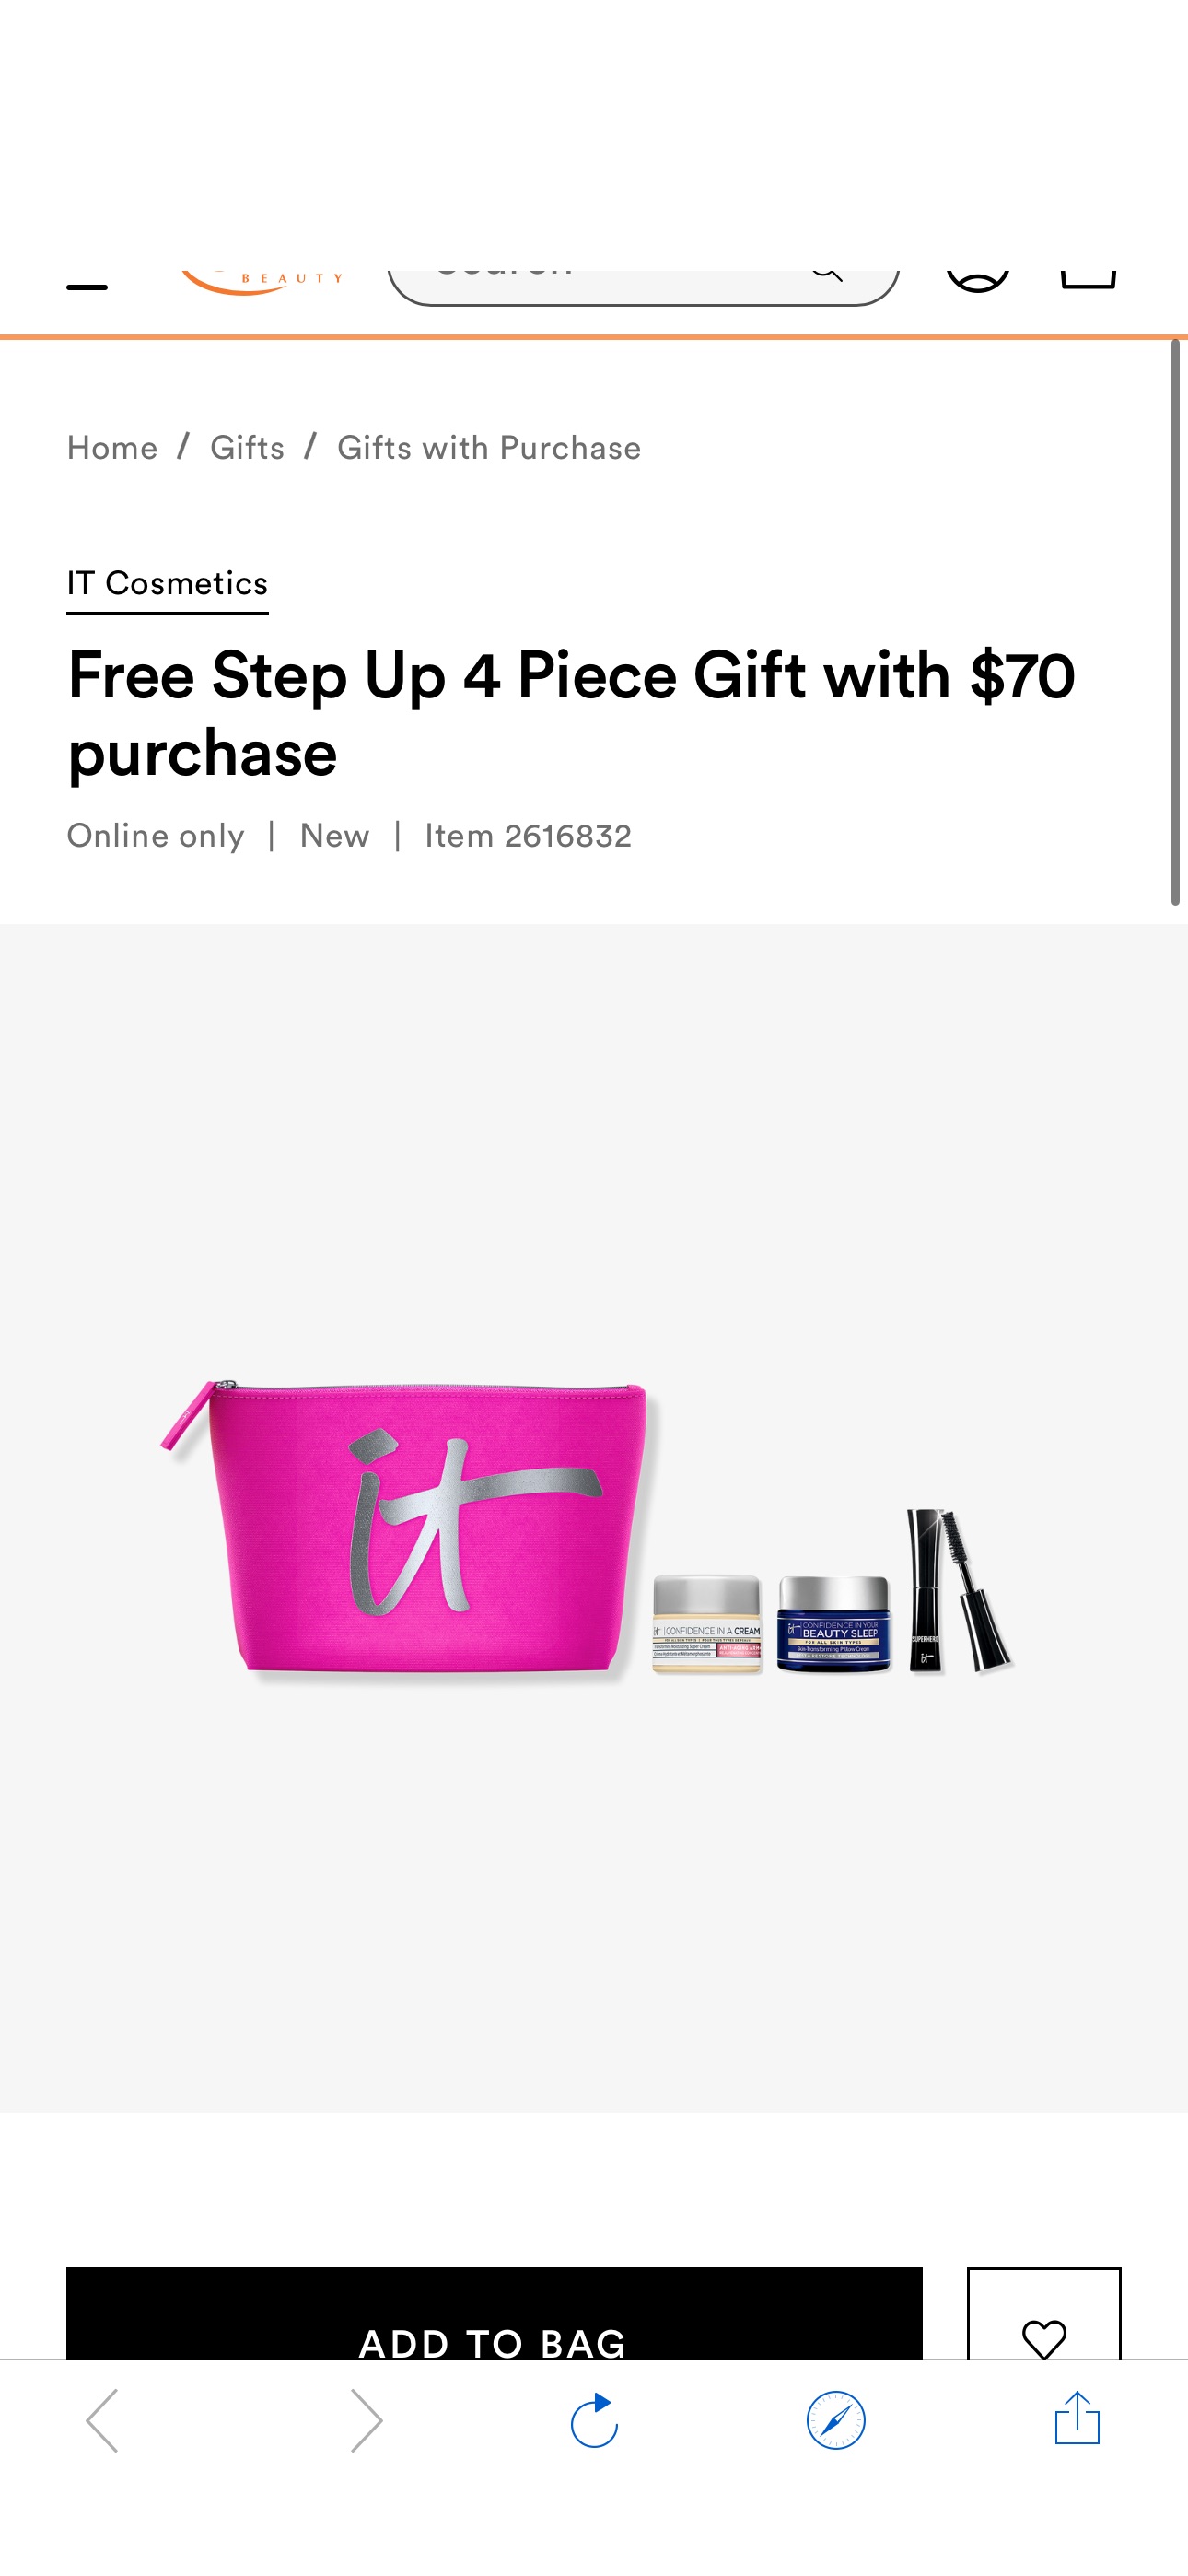 Free Step Up 4 Piece Gift with $70 purchase - IT Cosmetics | Ulta Beauty